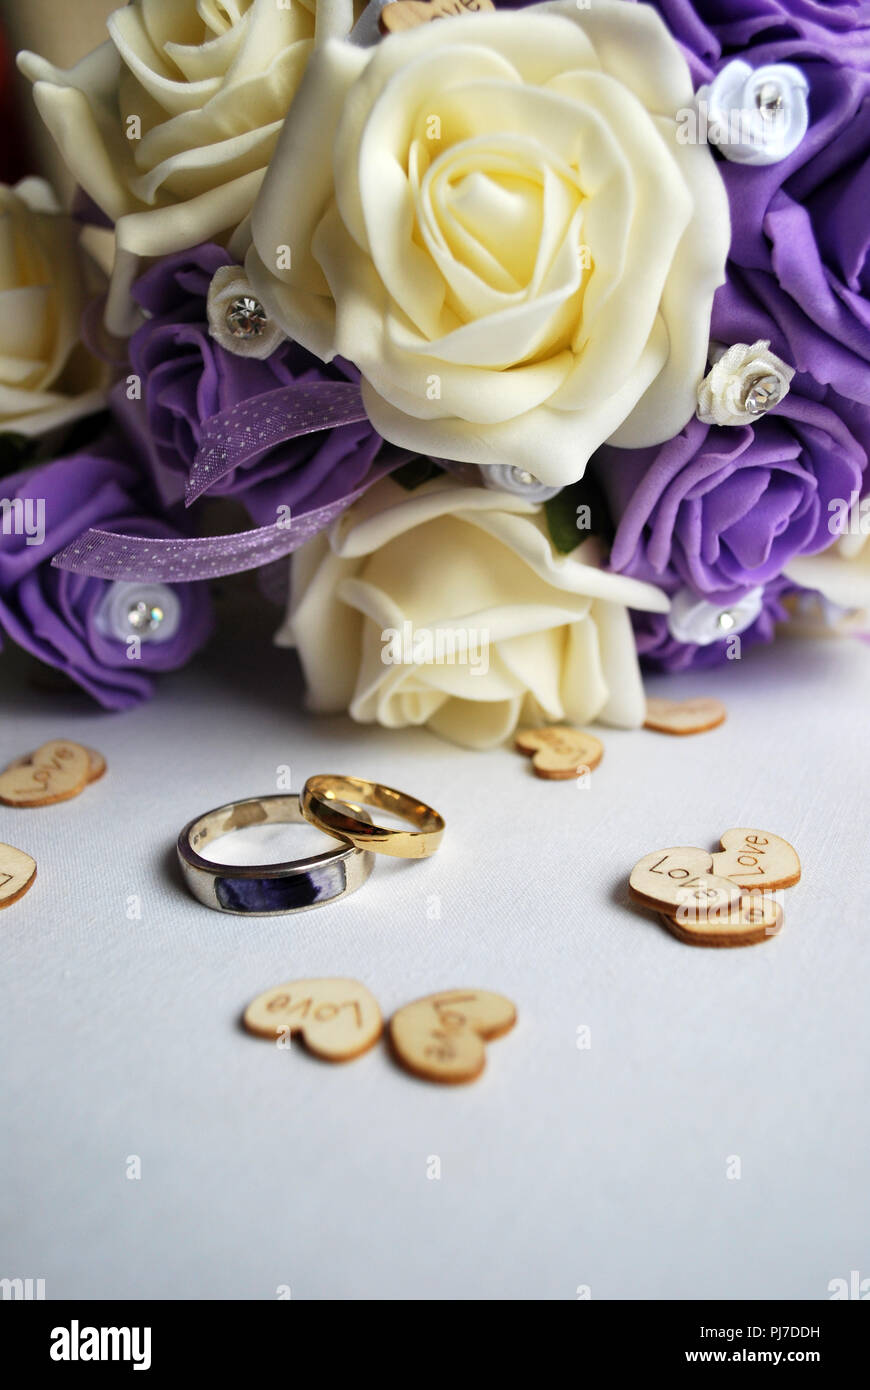 white and mauve rose bouquet with gold and silver wedding rings with inlaid blue john stone Stock Photo